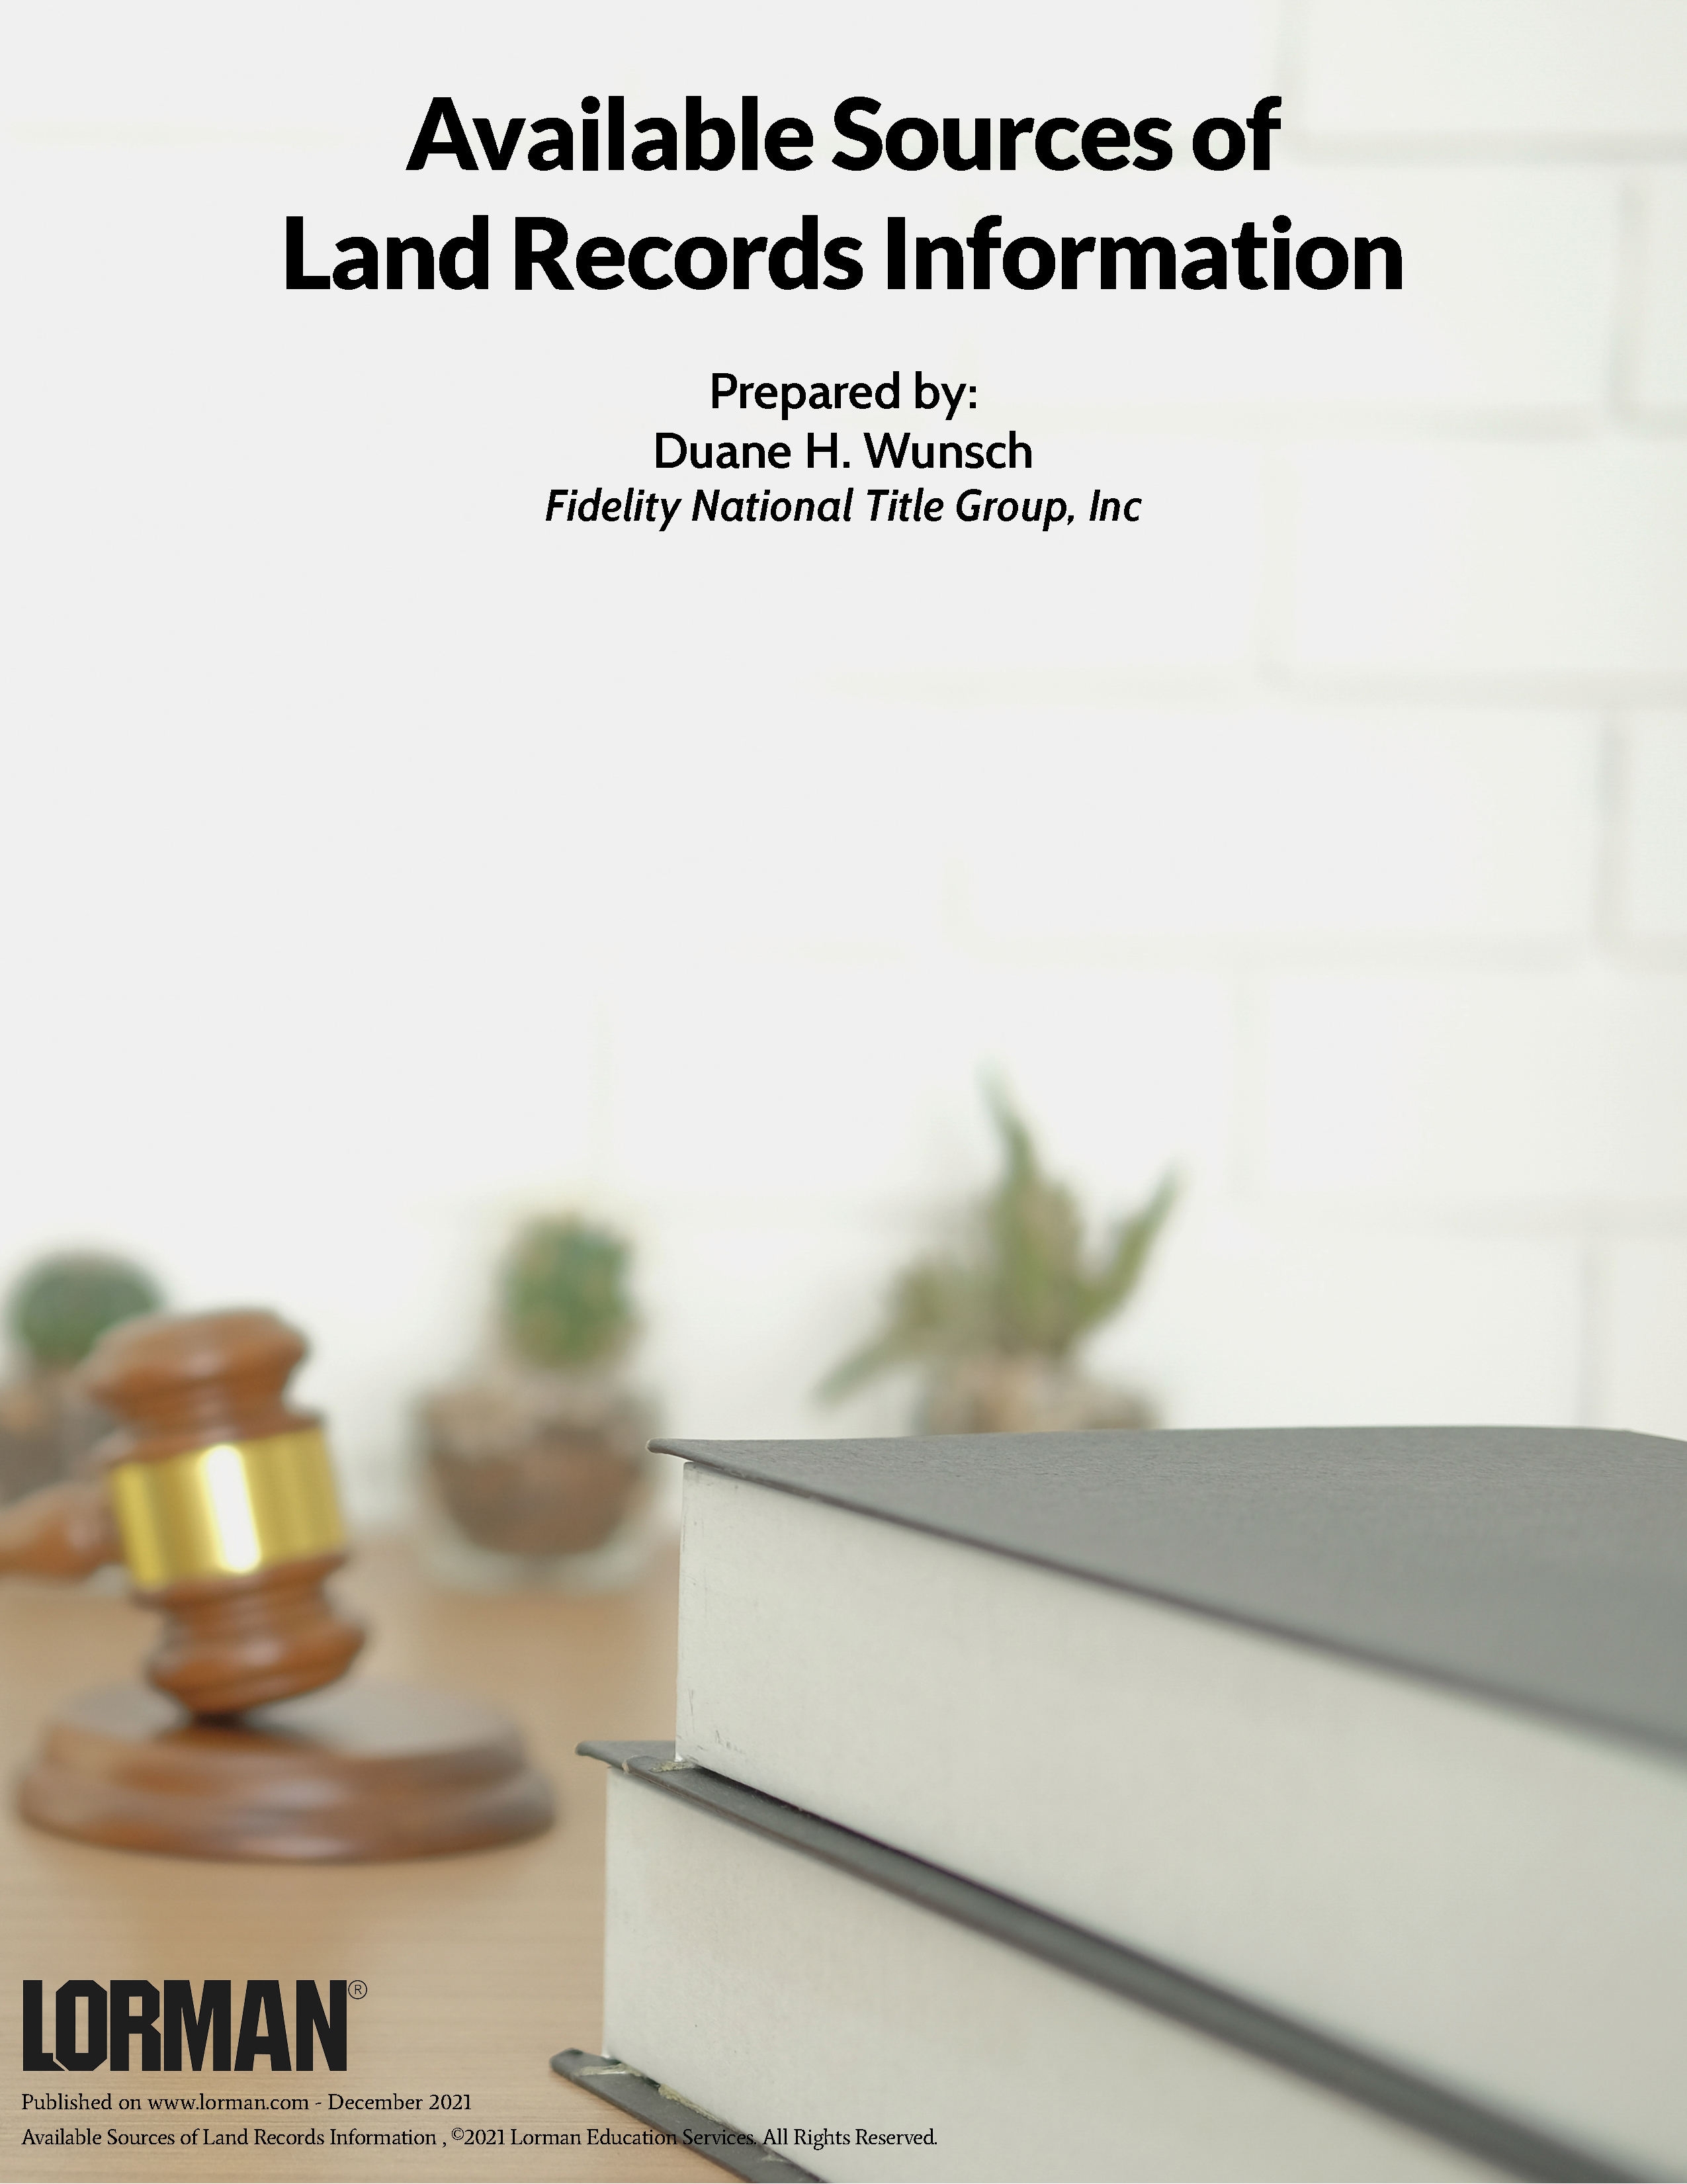 Available Sources of Land Records Information